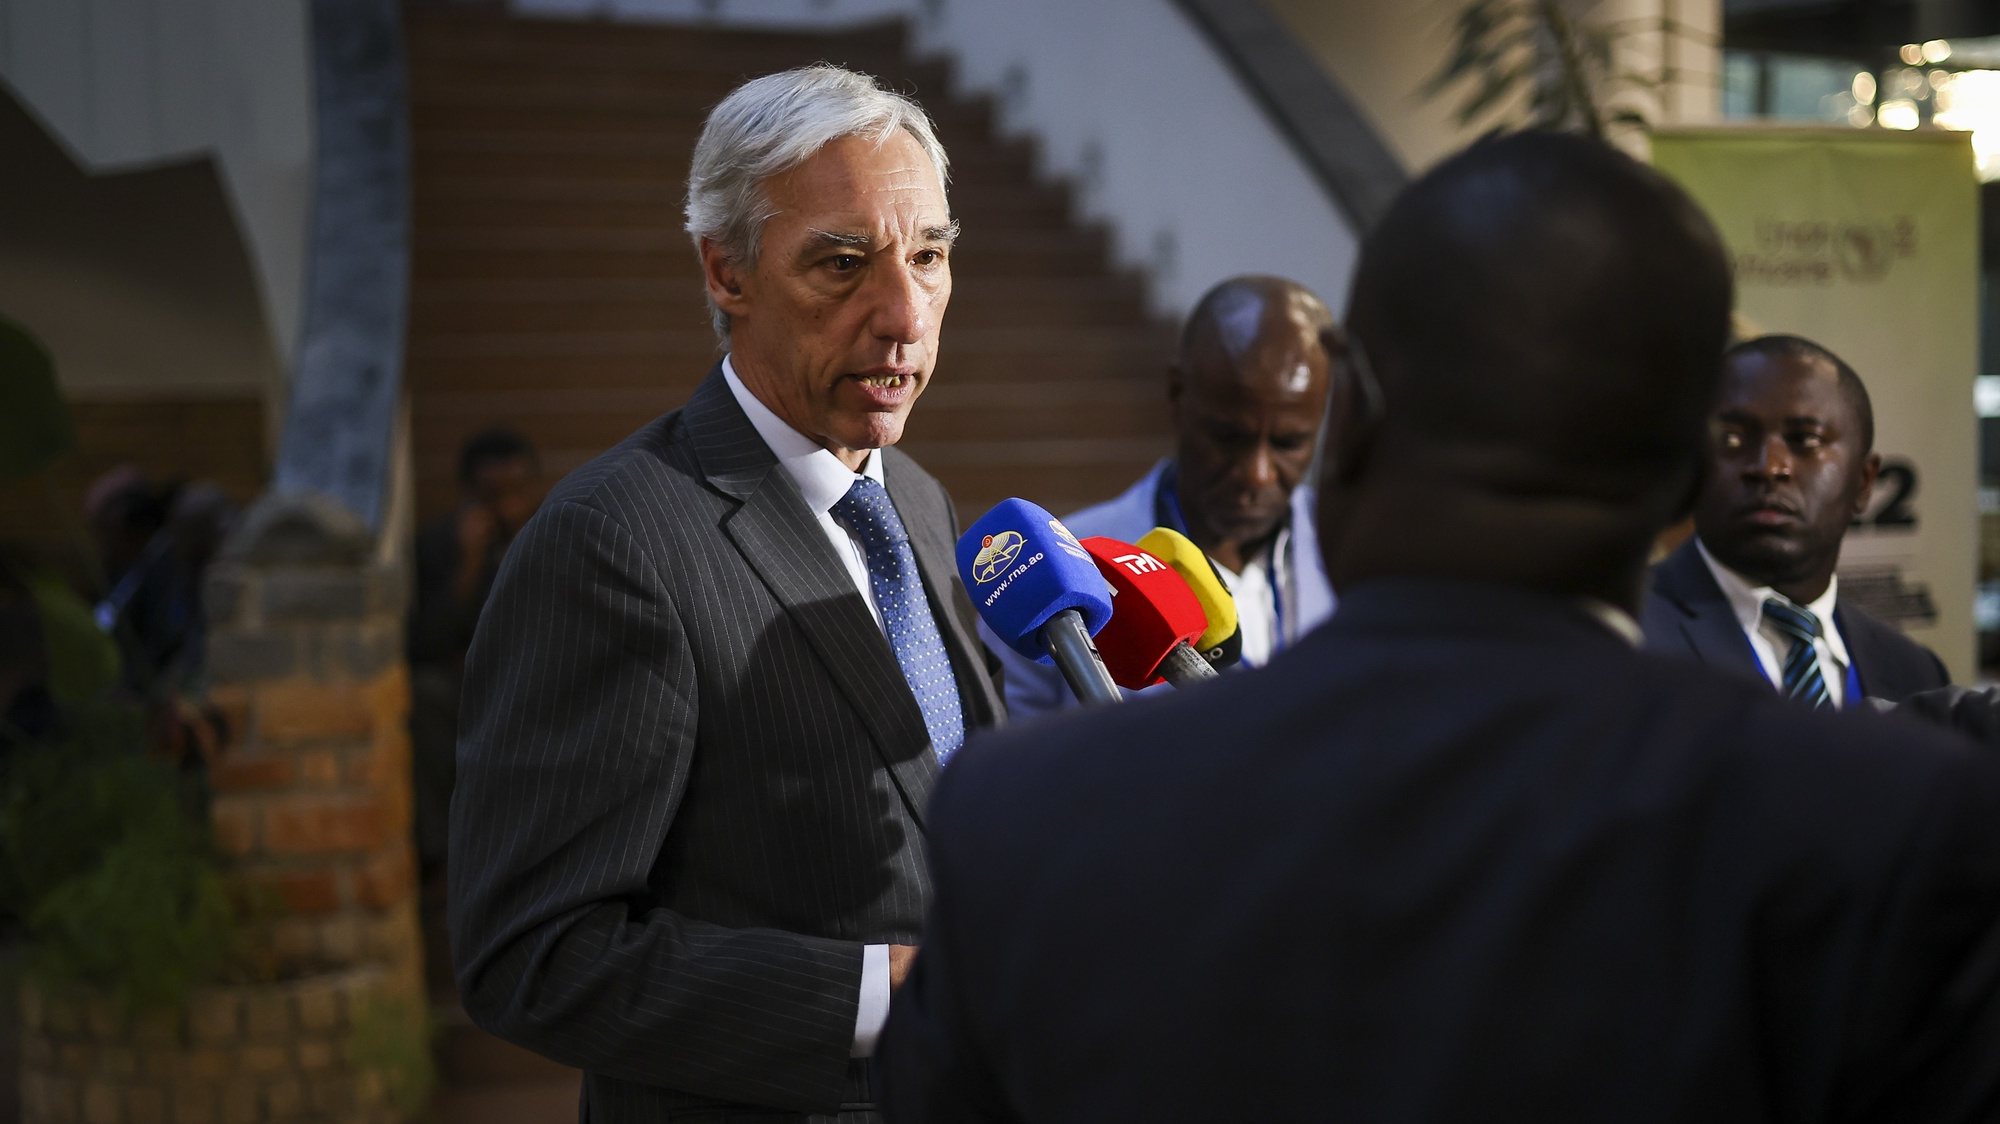 Portugal&#039;s Foreigner Affairs Minister Joao Gomes Cravinho addressing the media at the start of the African Union Summit in Addis Ababa, Ethiopia, 17 February 2023. The African Union Summit runs until 19. JOSE SENA GOULAO/LUSA